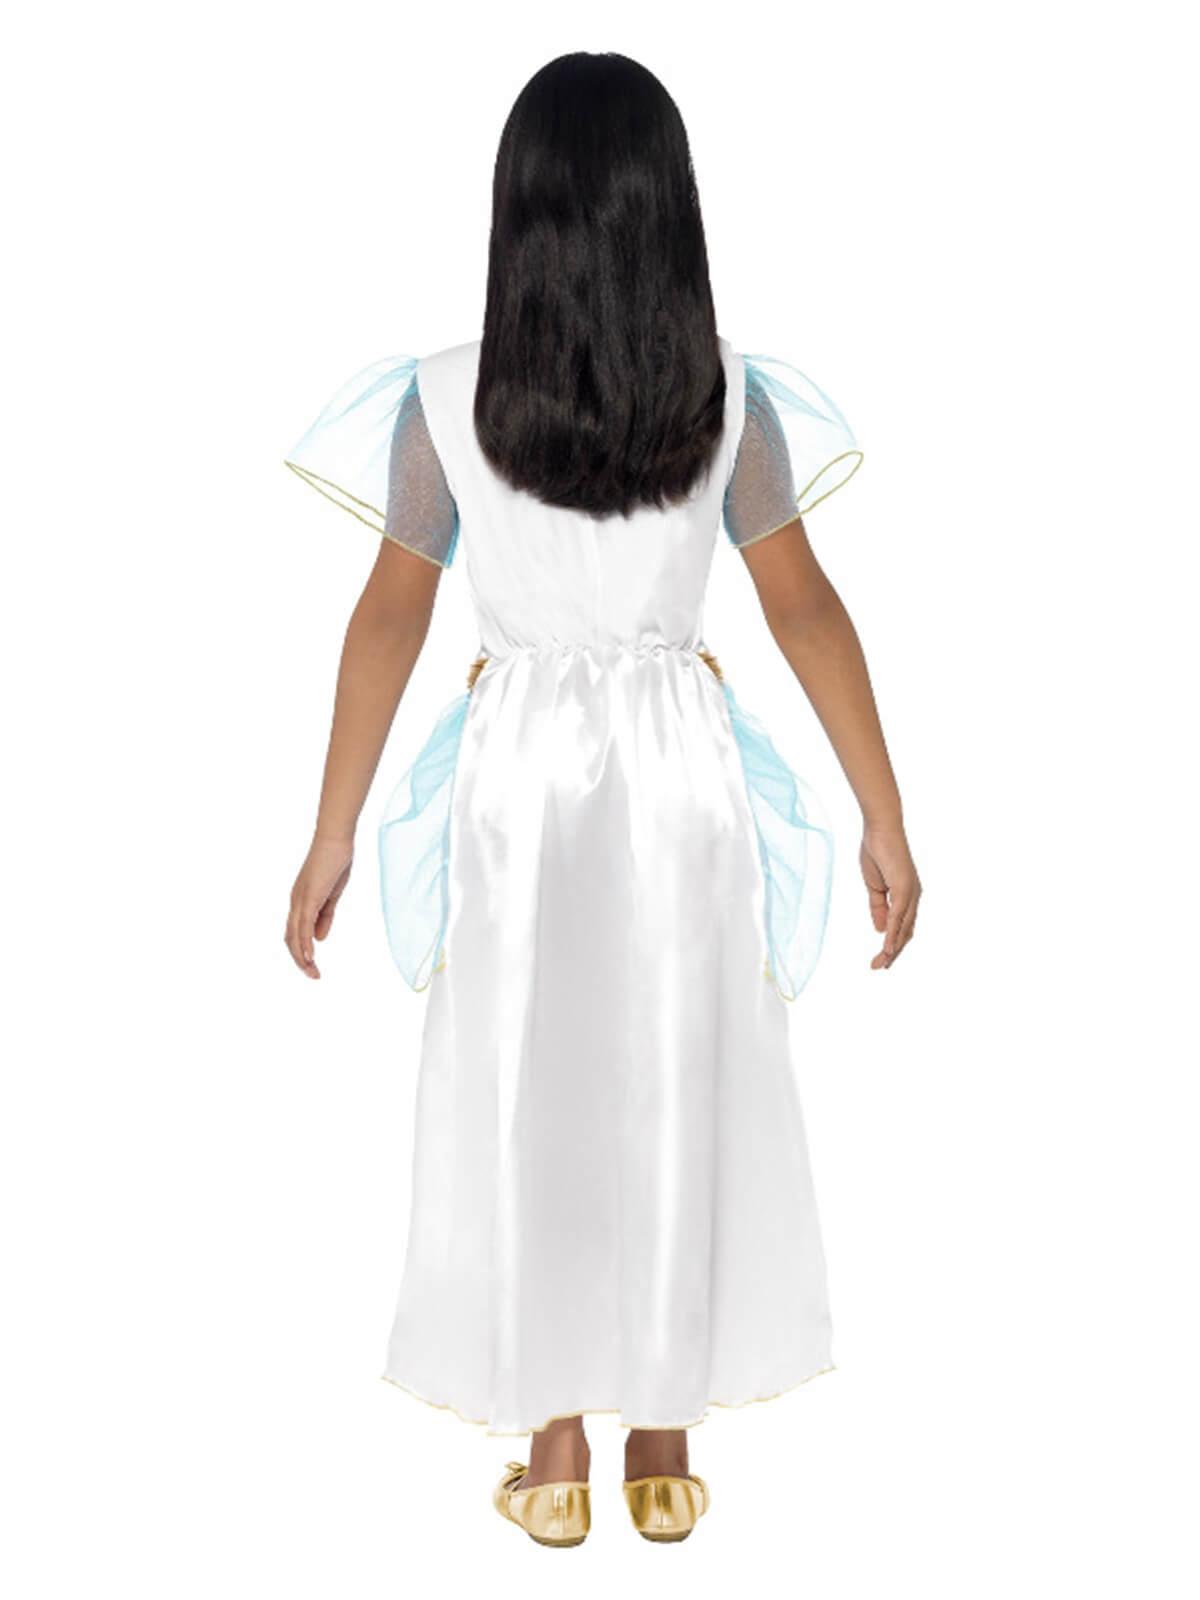 Deluxe Cleopatra Girl Costume, White